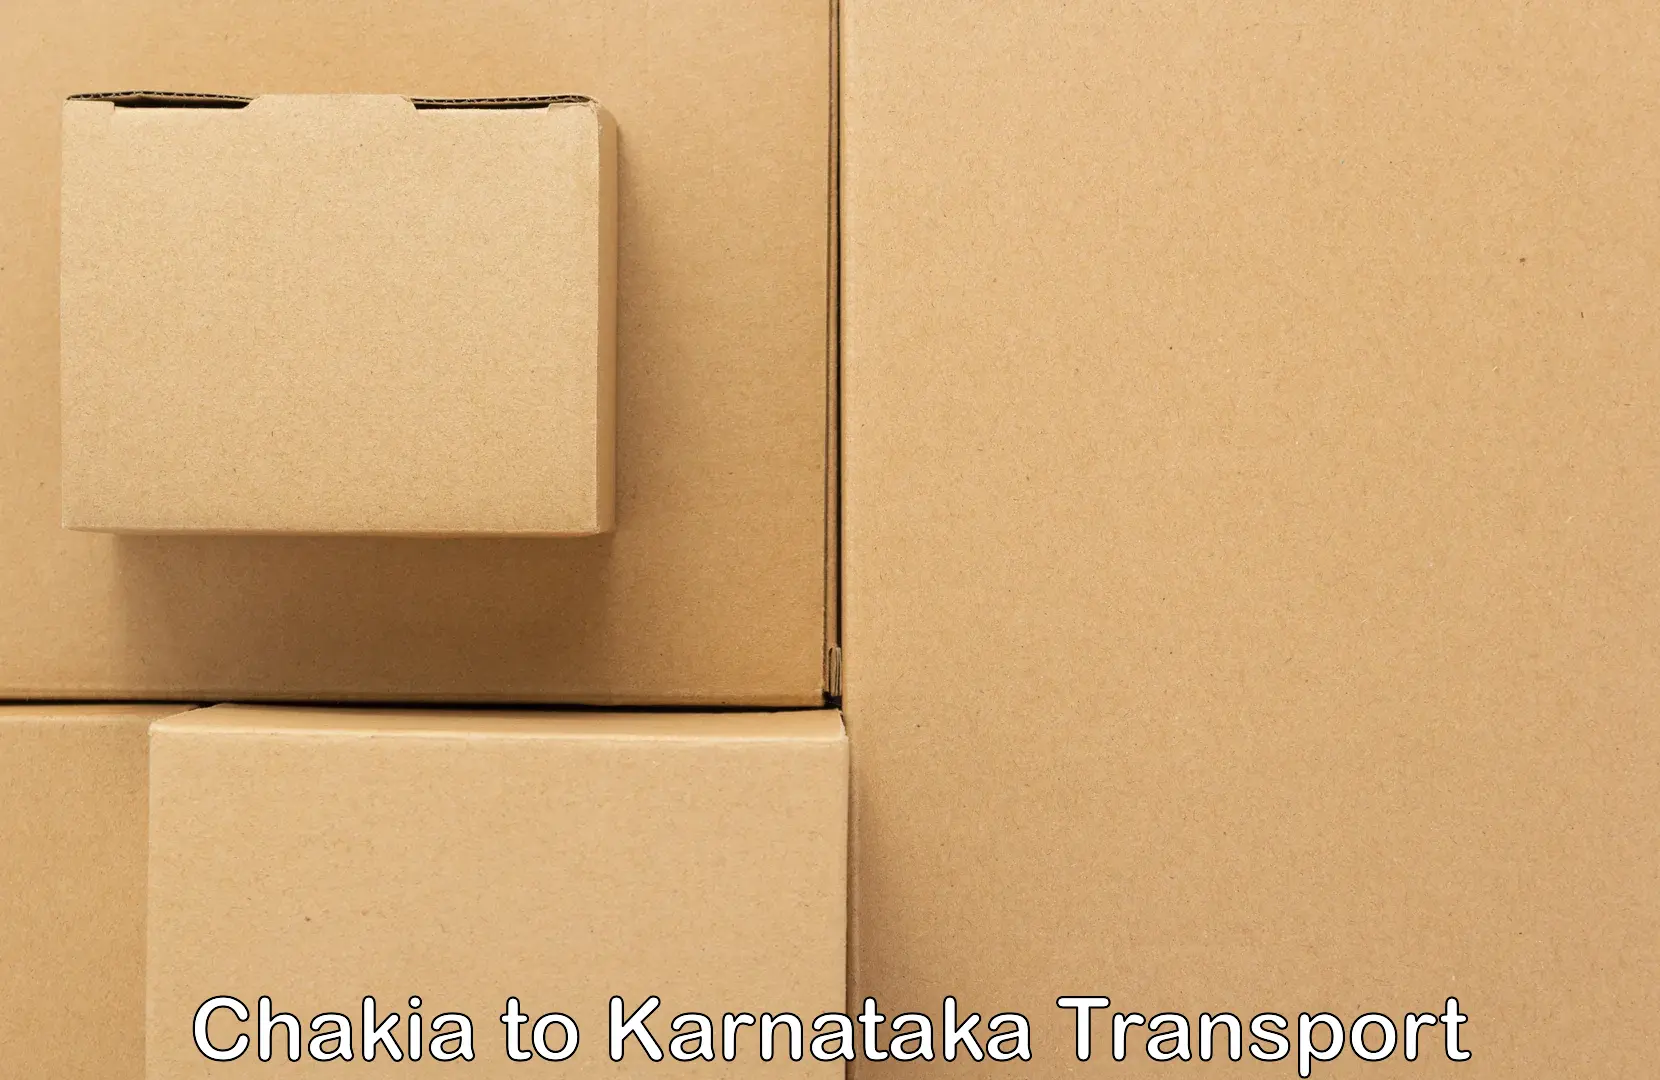 Commercial transport service Chakia to Chikkamagalur